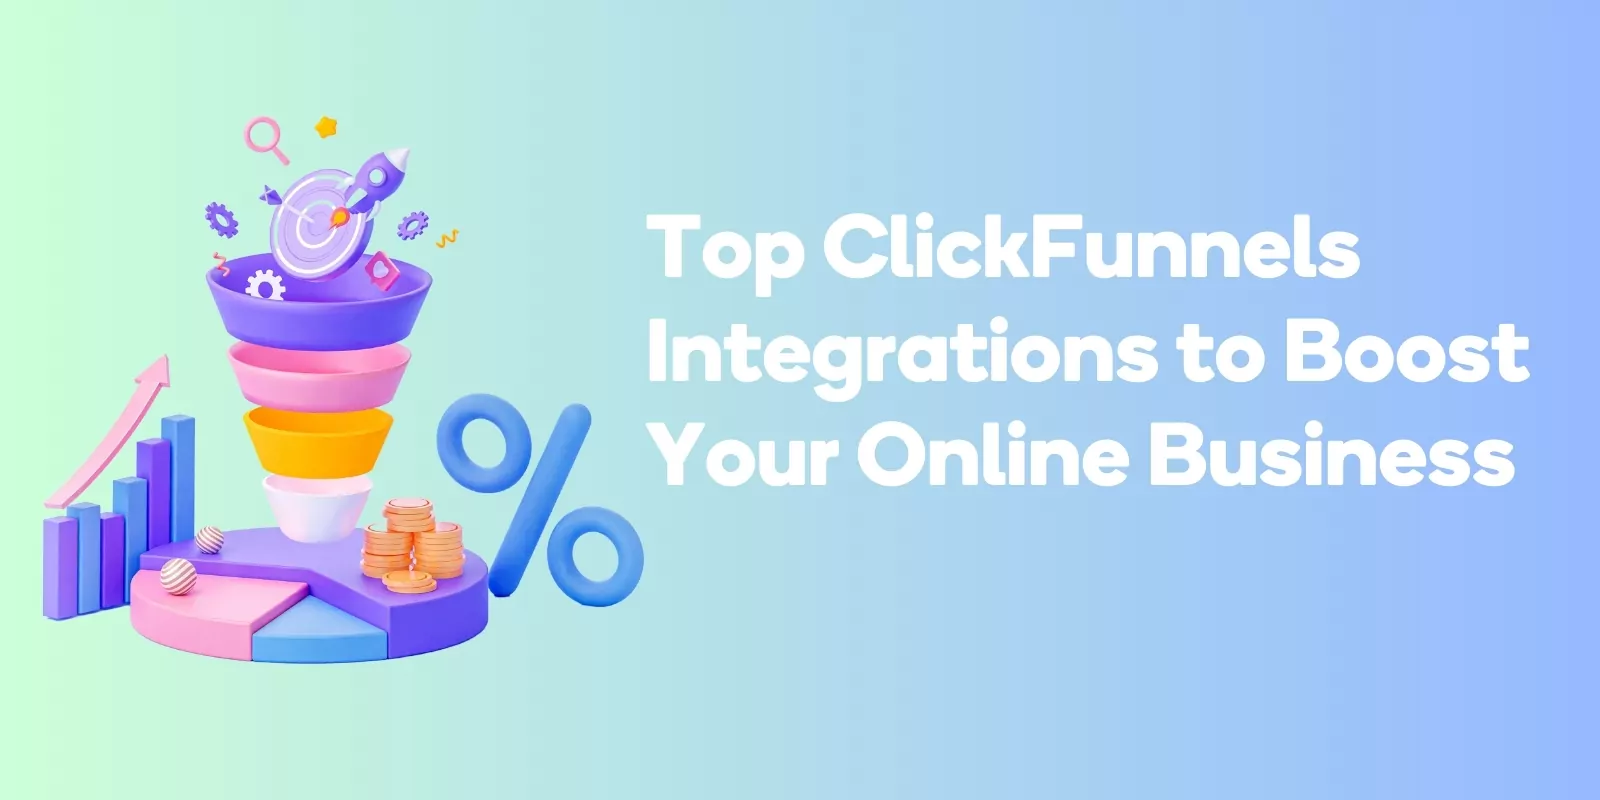 Top ClickFunnels Integrations to Boost Your Online Business